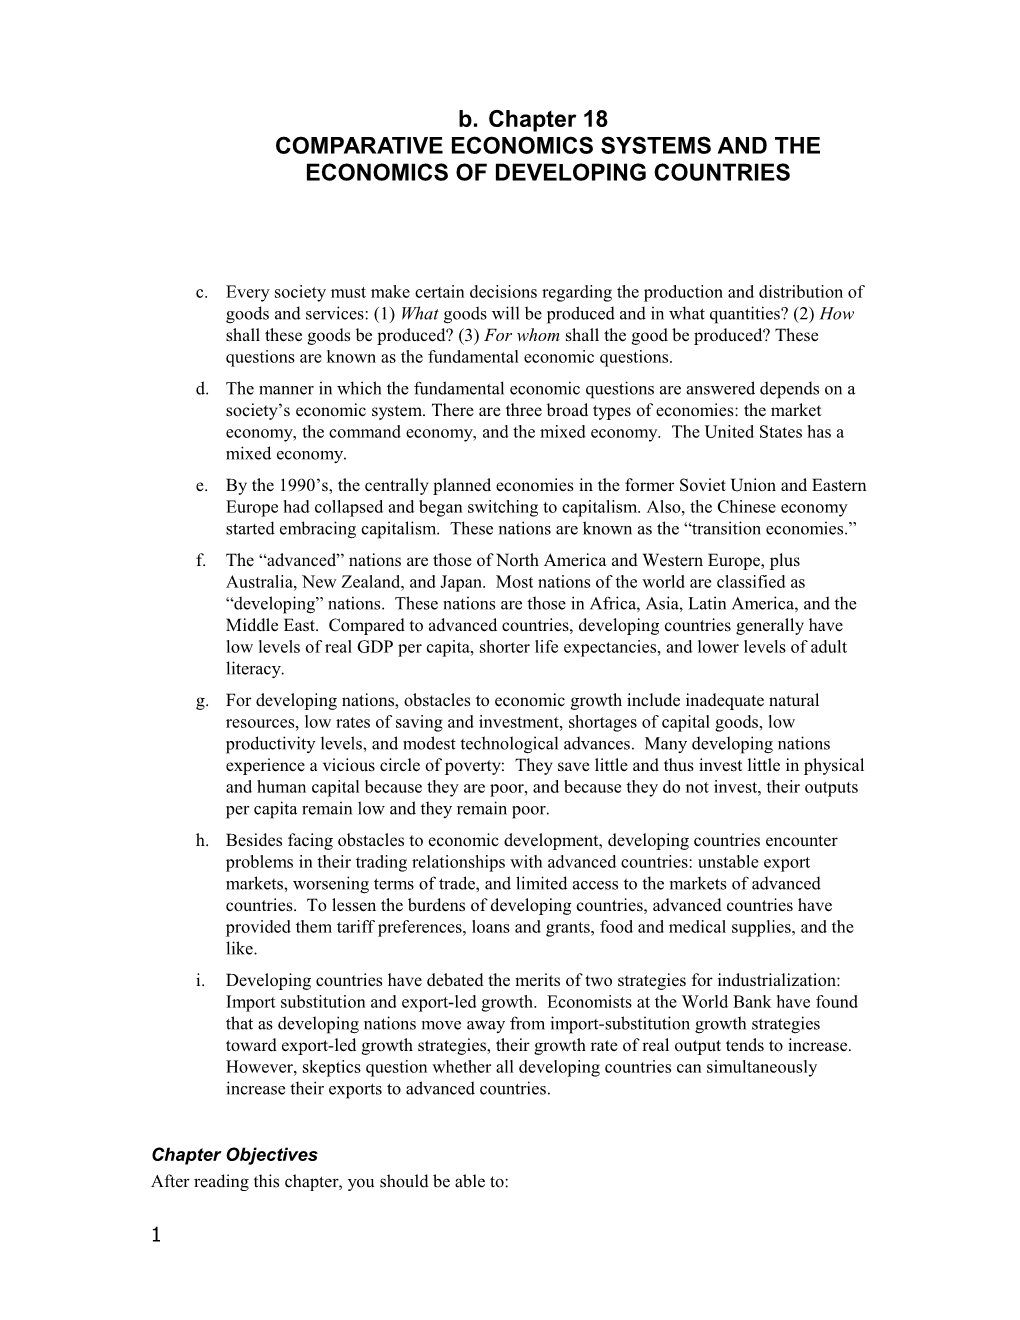 Chapter 18COMPARATIVE ECONOMICS SYSTEMS and the ECONOMICS of DEVELOPING COUNTRIES